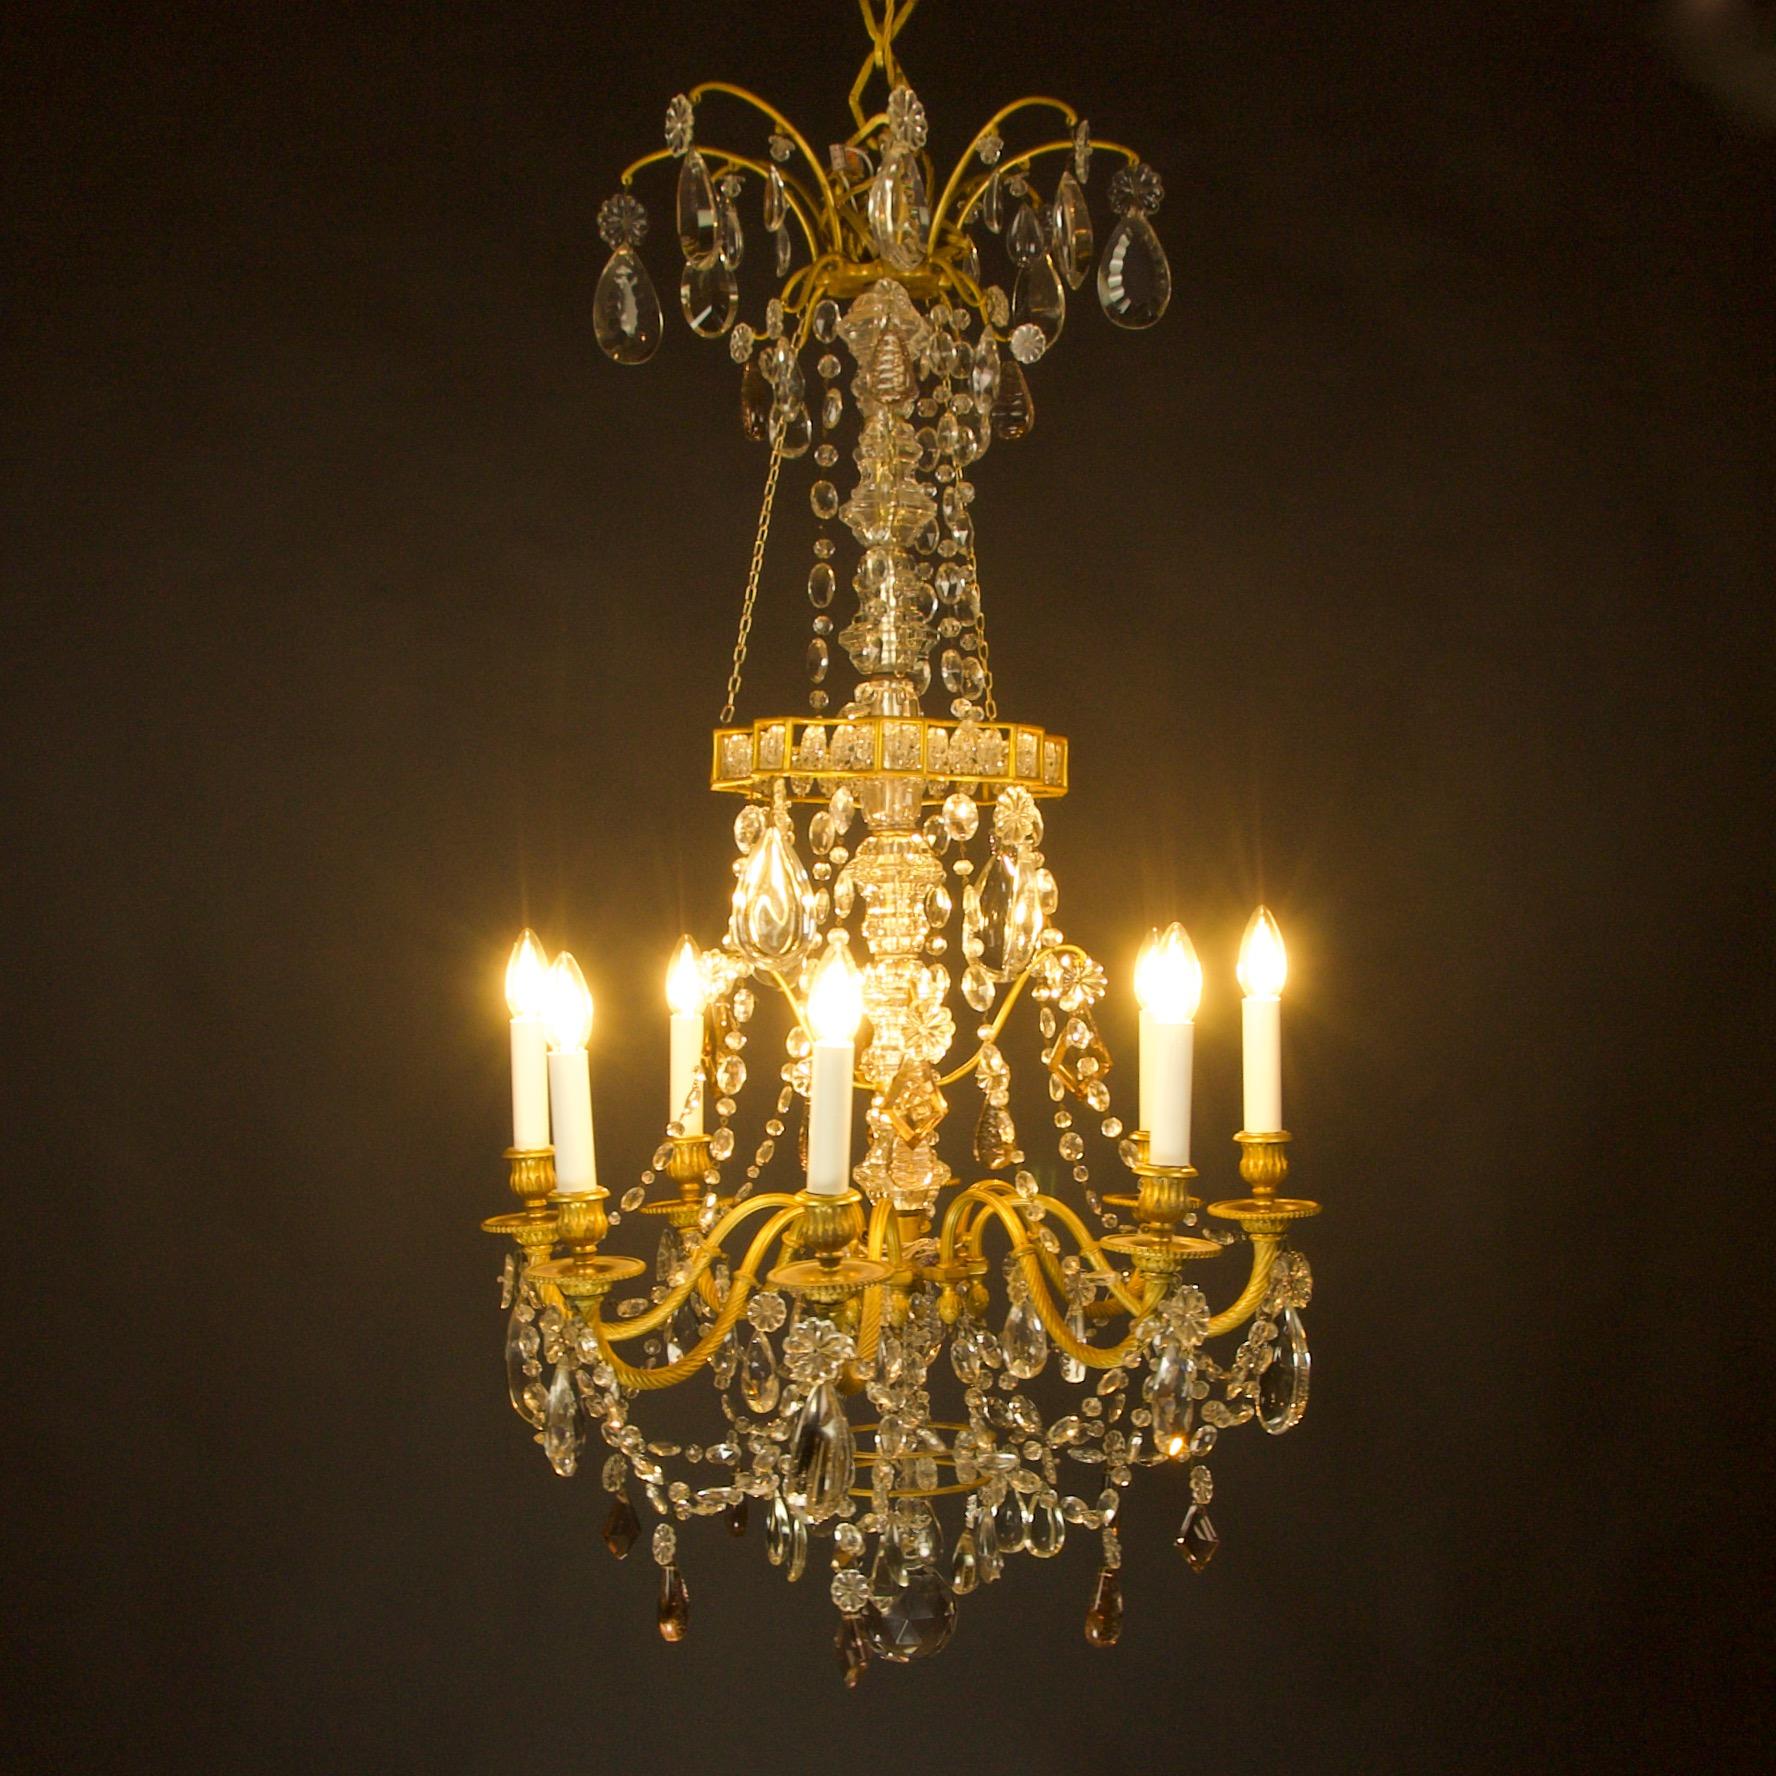 Late 19th century Louis XVI style eight light crystal cut and gilt-bronze chandelier attributed to Paris luxury lighting manufacterer Maison Baguès. 
This eight-light chandelier features an elegant and detailed bronze frame hang with heavy high